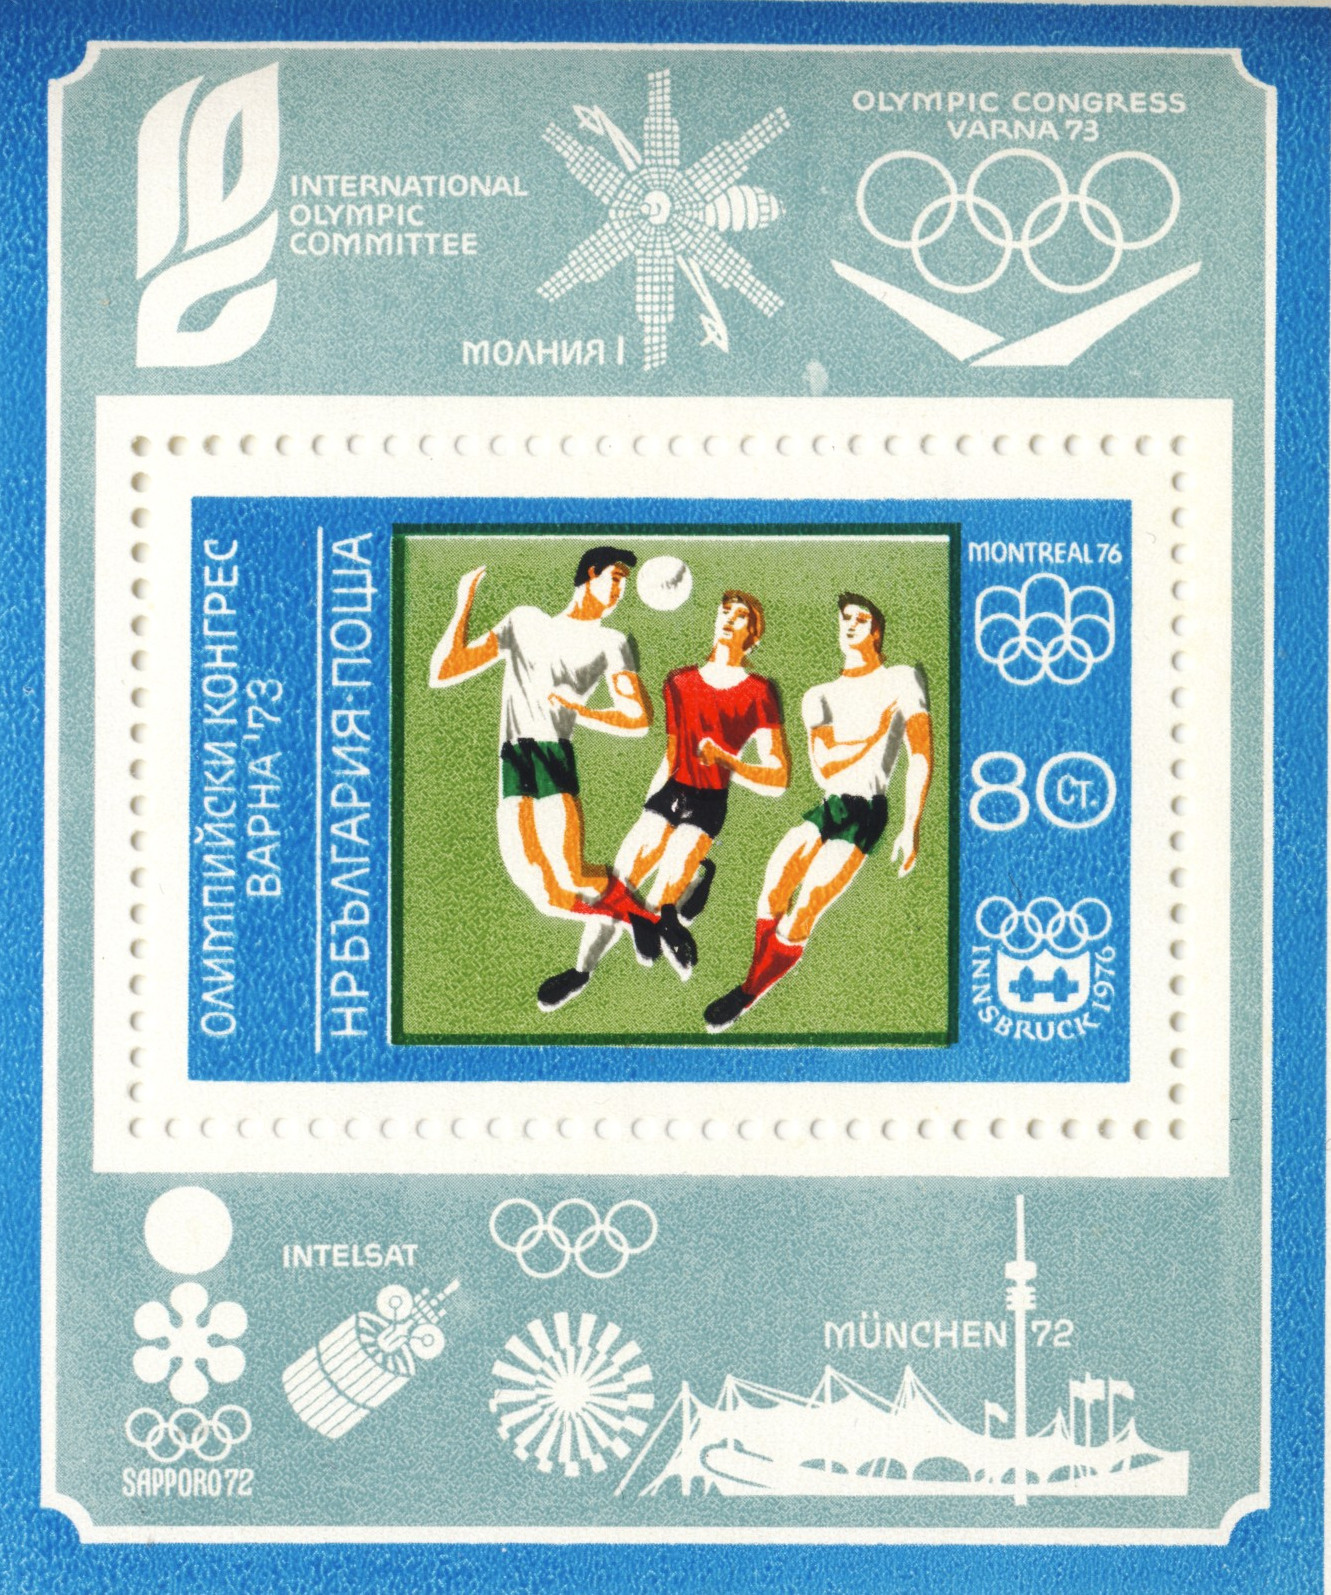 A special stamp was issued to commemorate the Olympic Congress in Varna ©Bulgaria Post